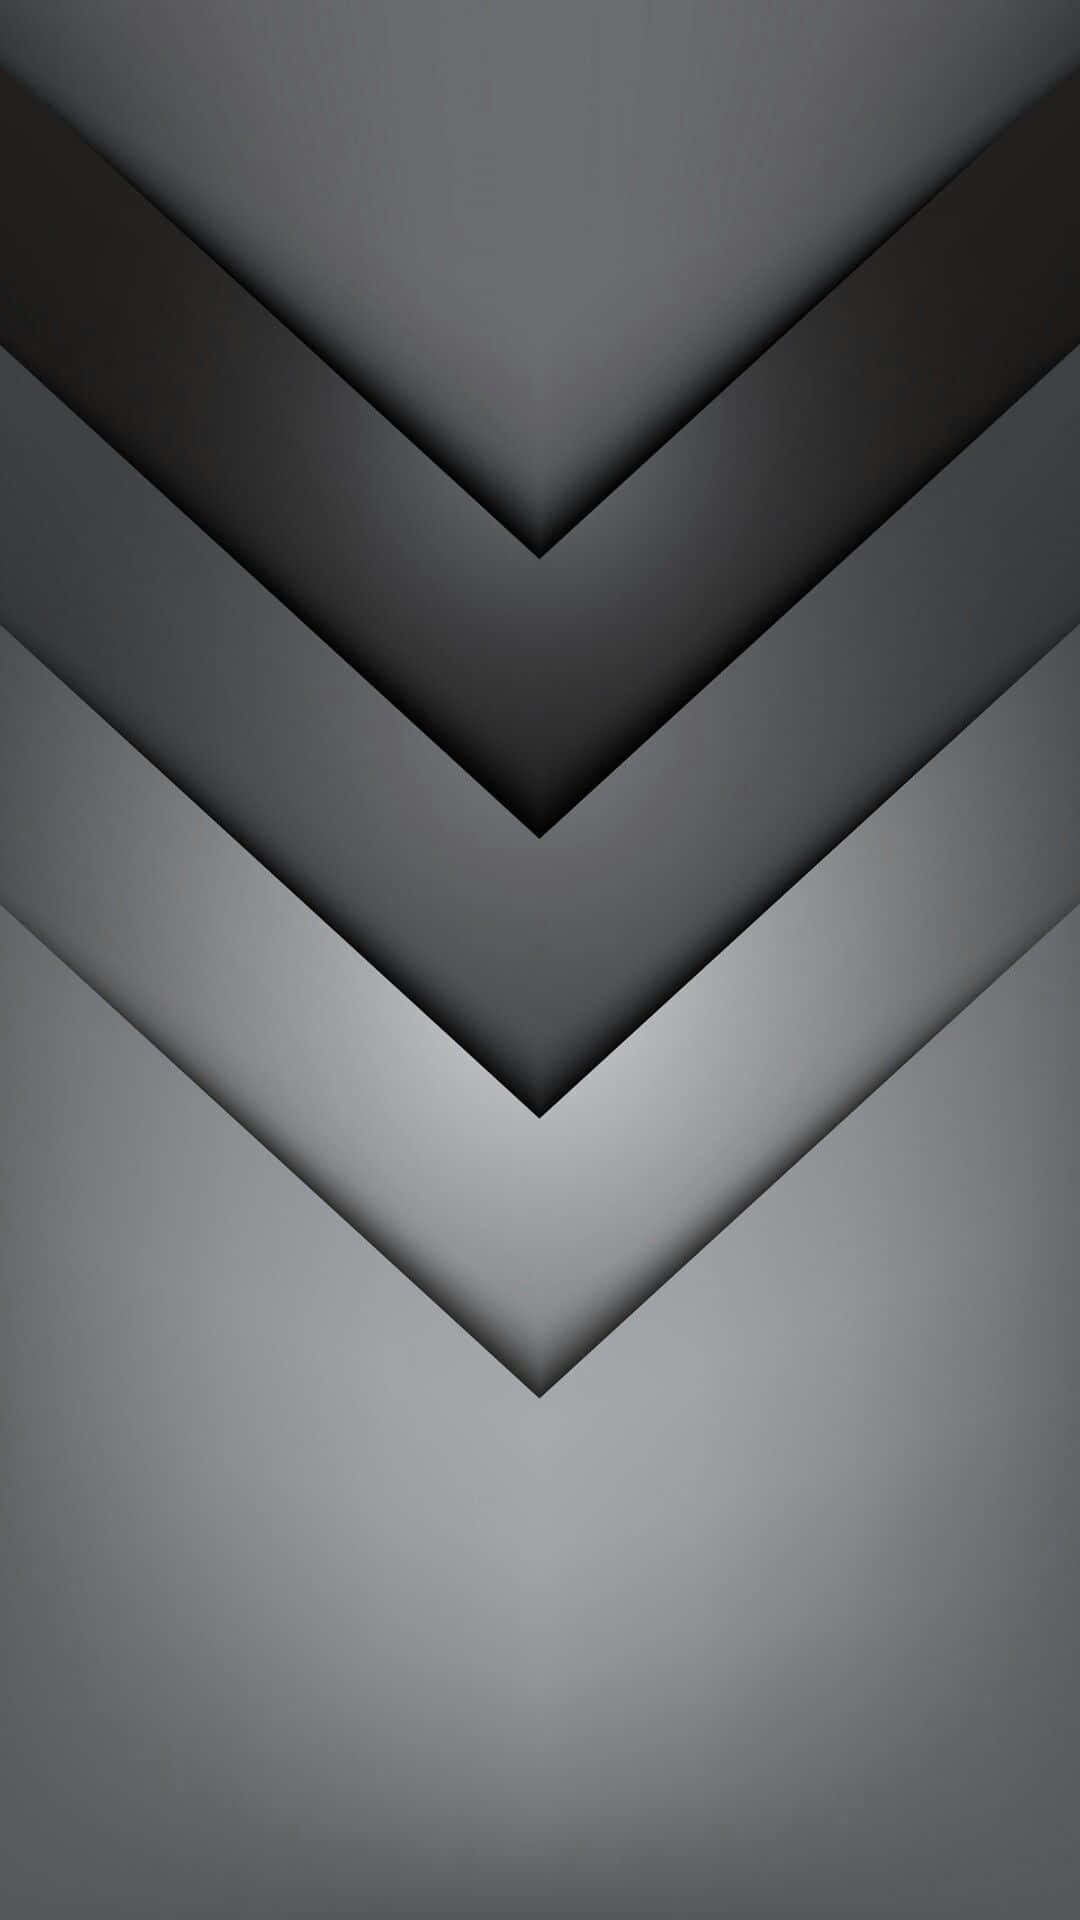 A dark and modern abstract design of a grey gradient background